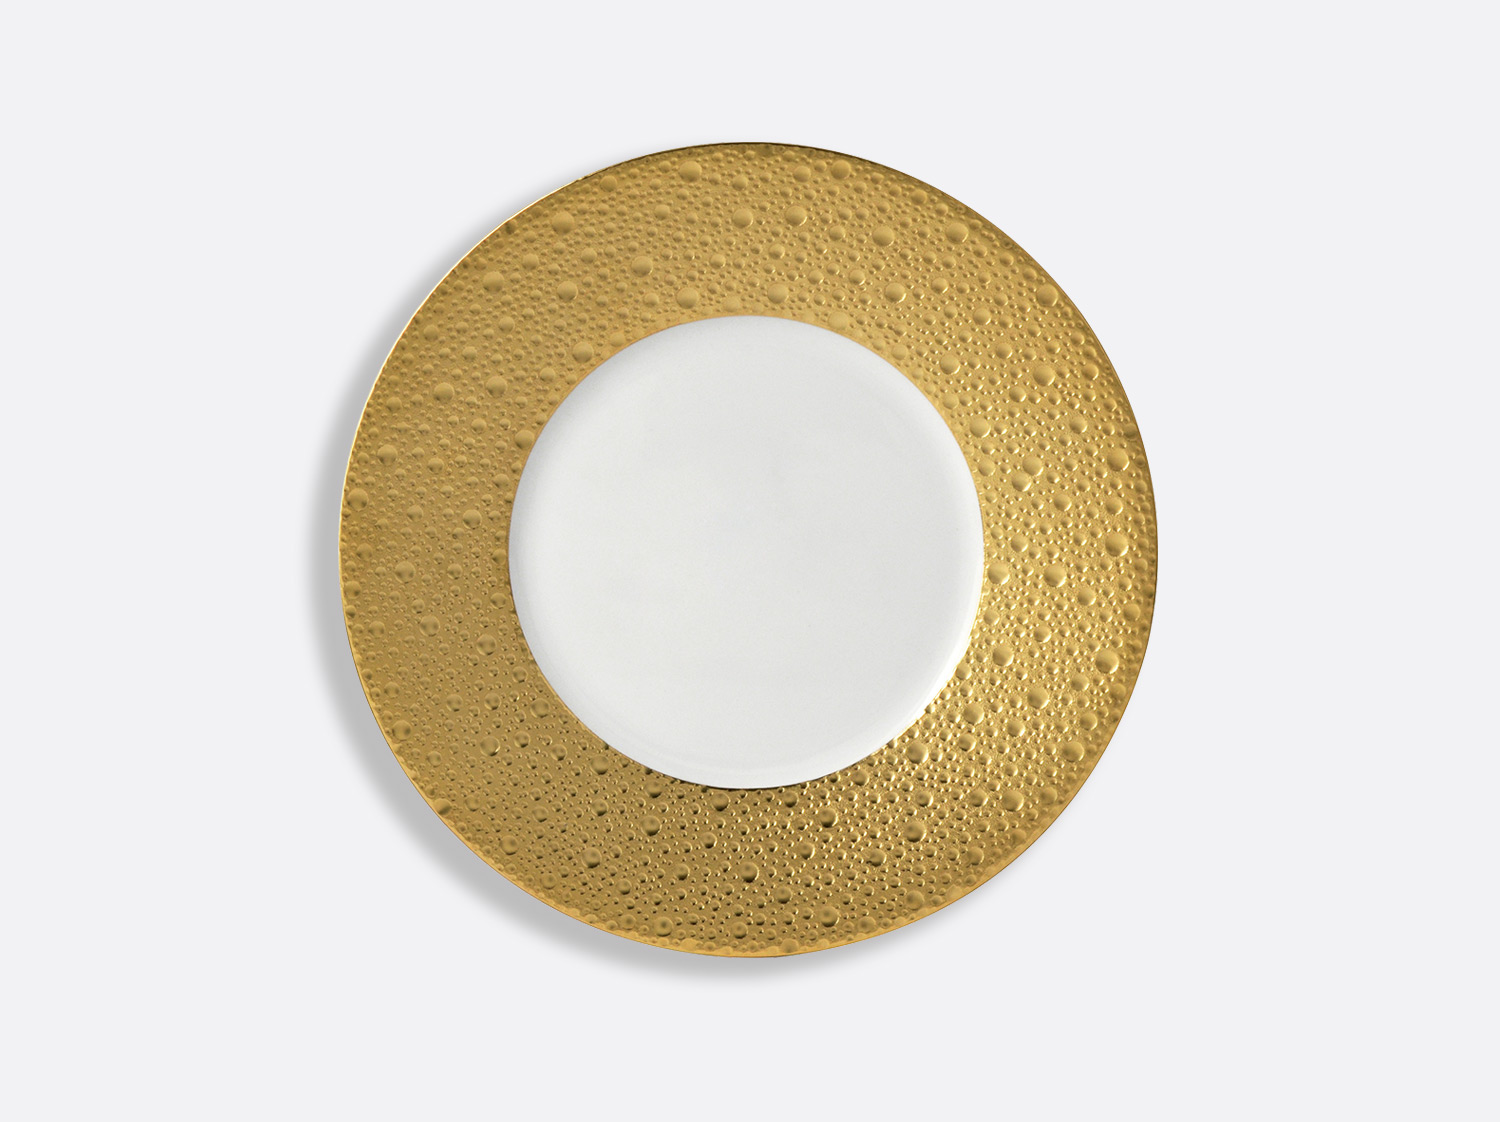 China Plate 21 cm of the collection Ecume gold | Bernardaud